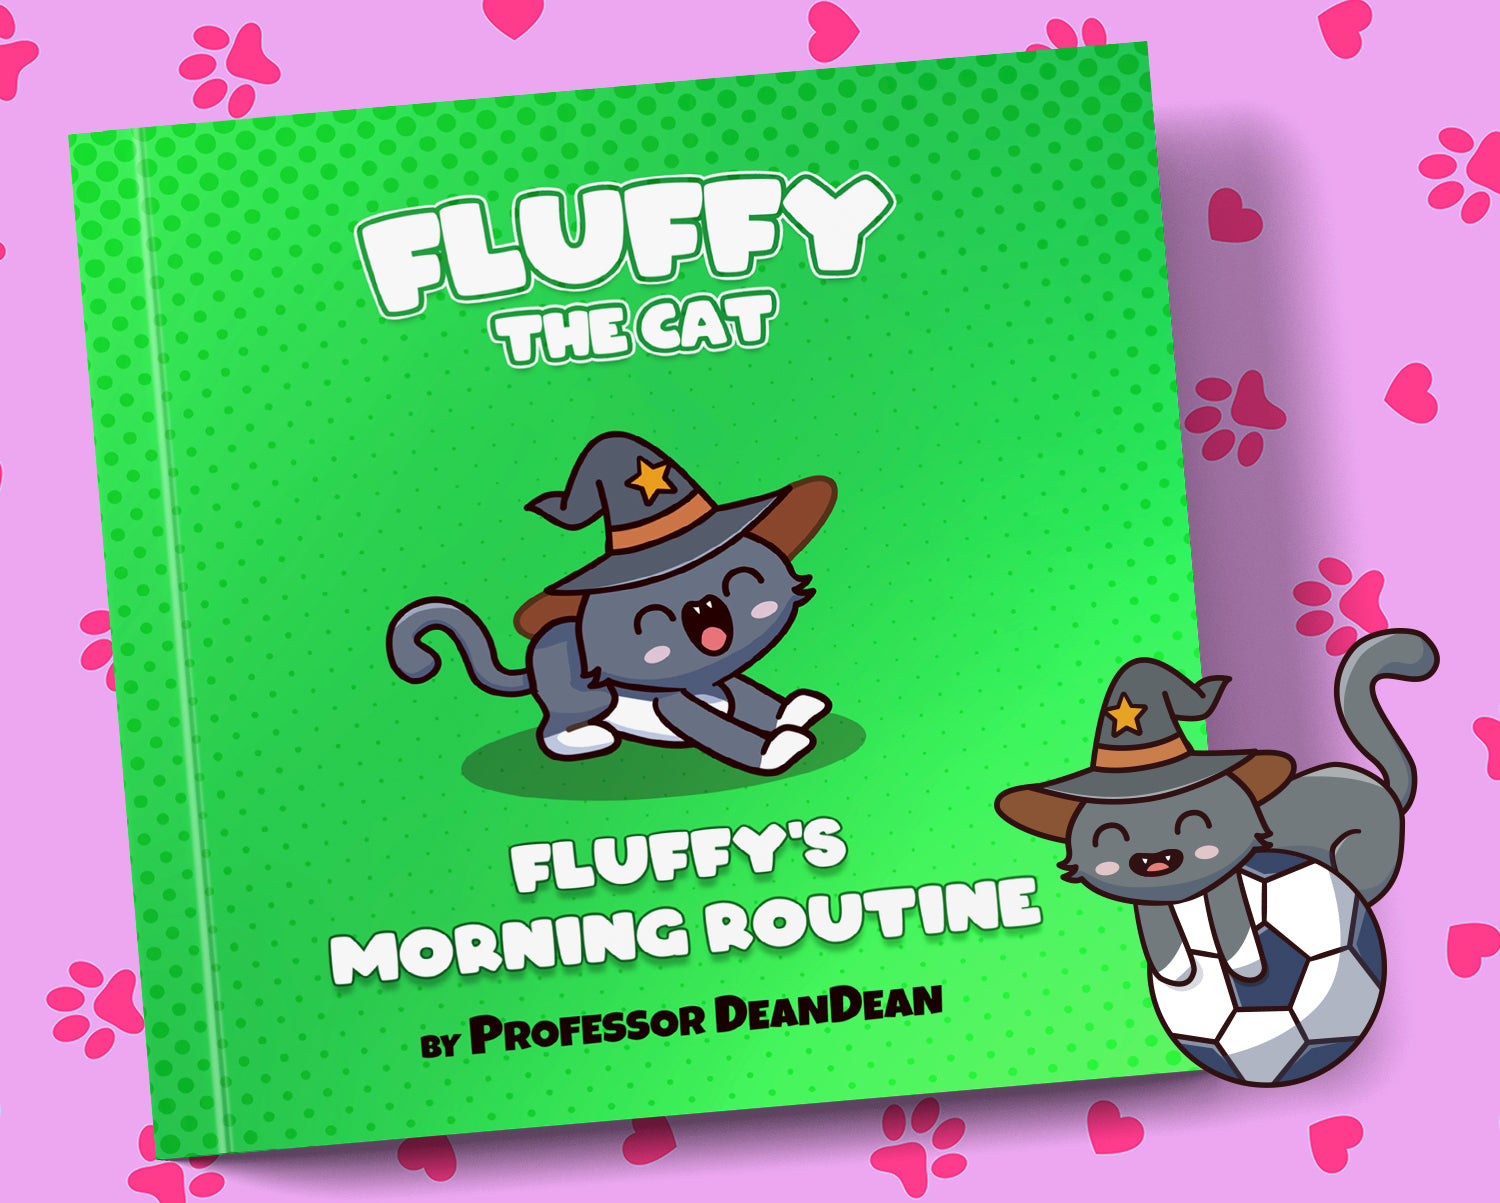 Fluffy's Morning Routine